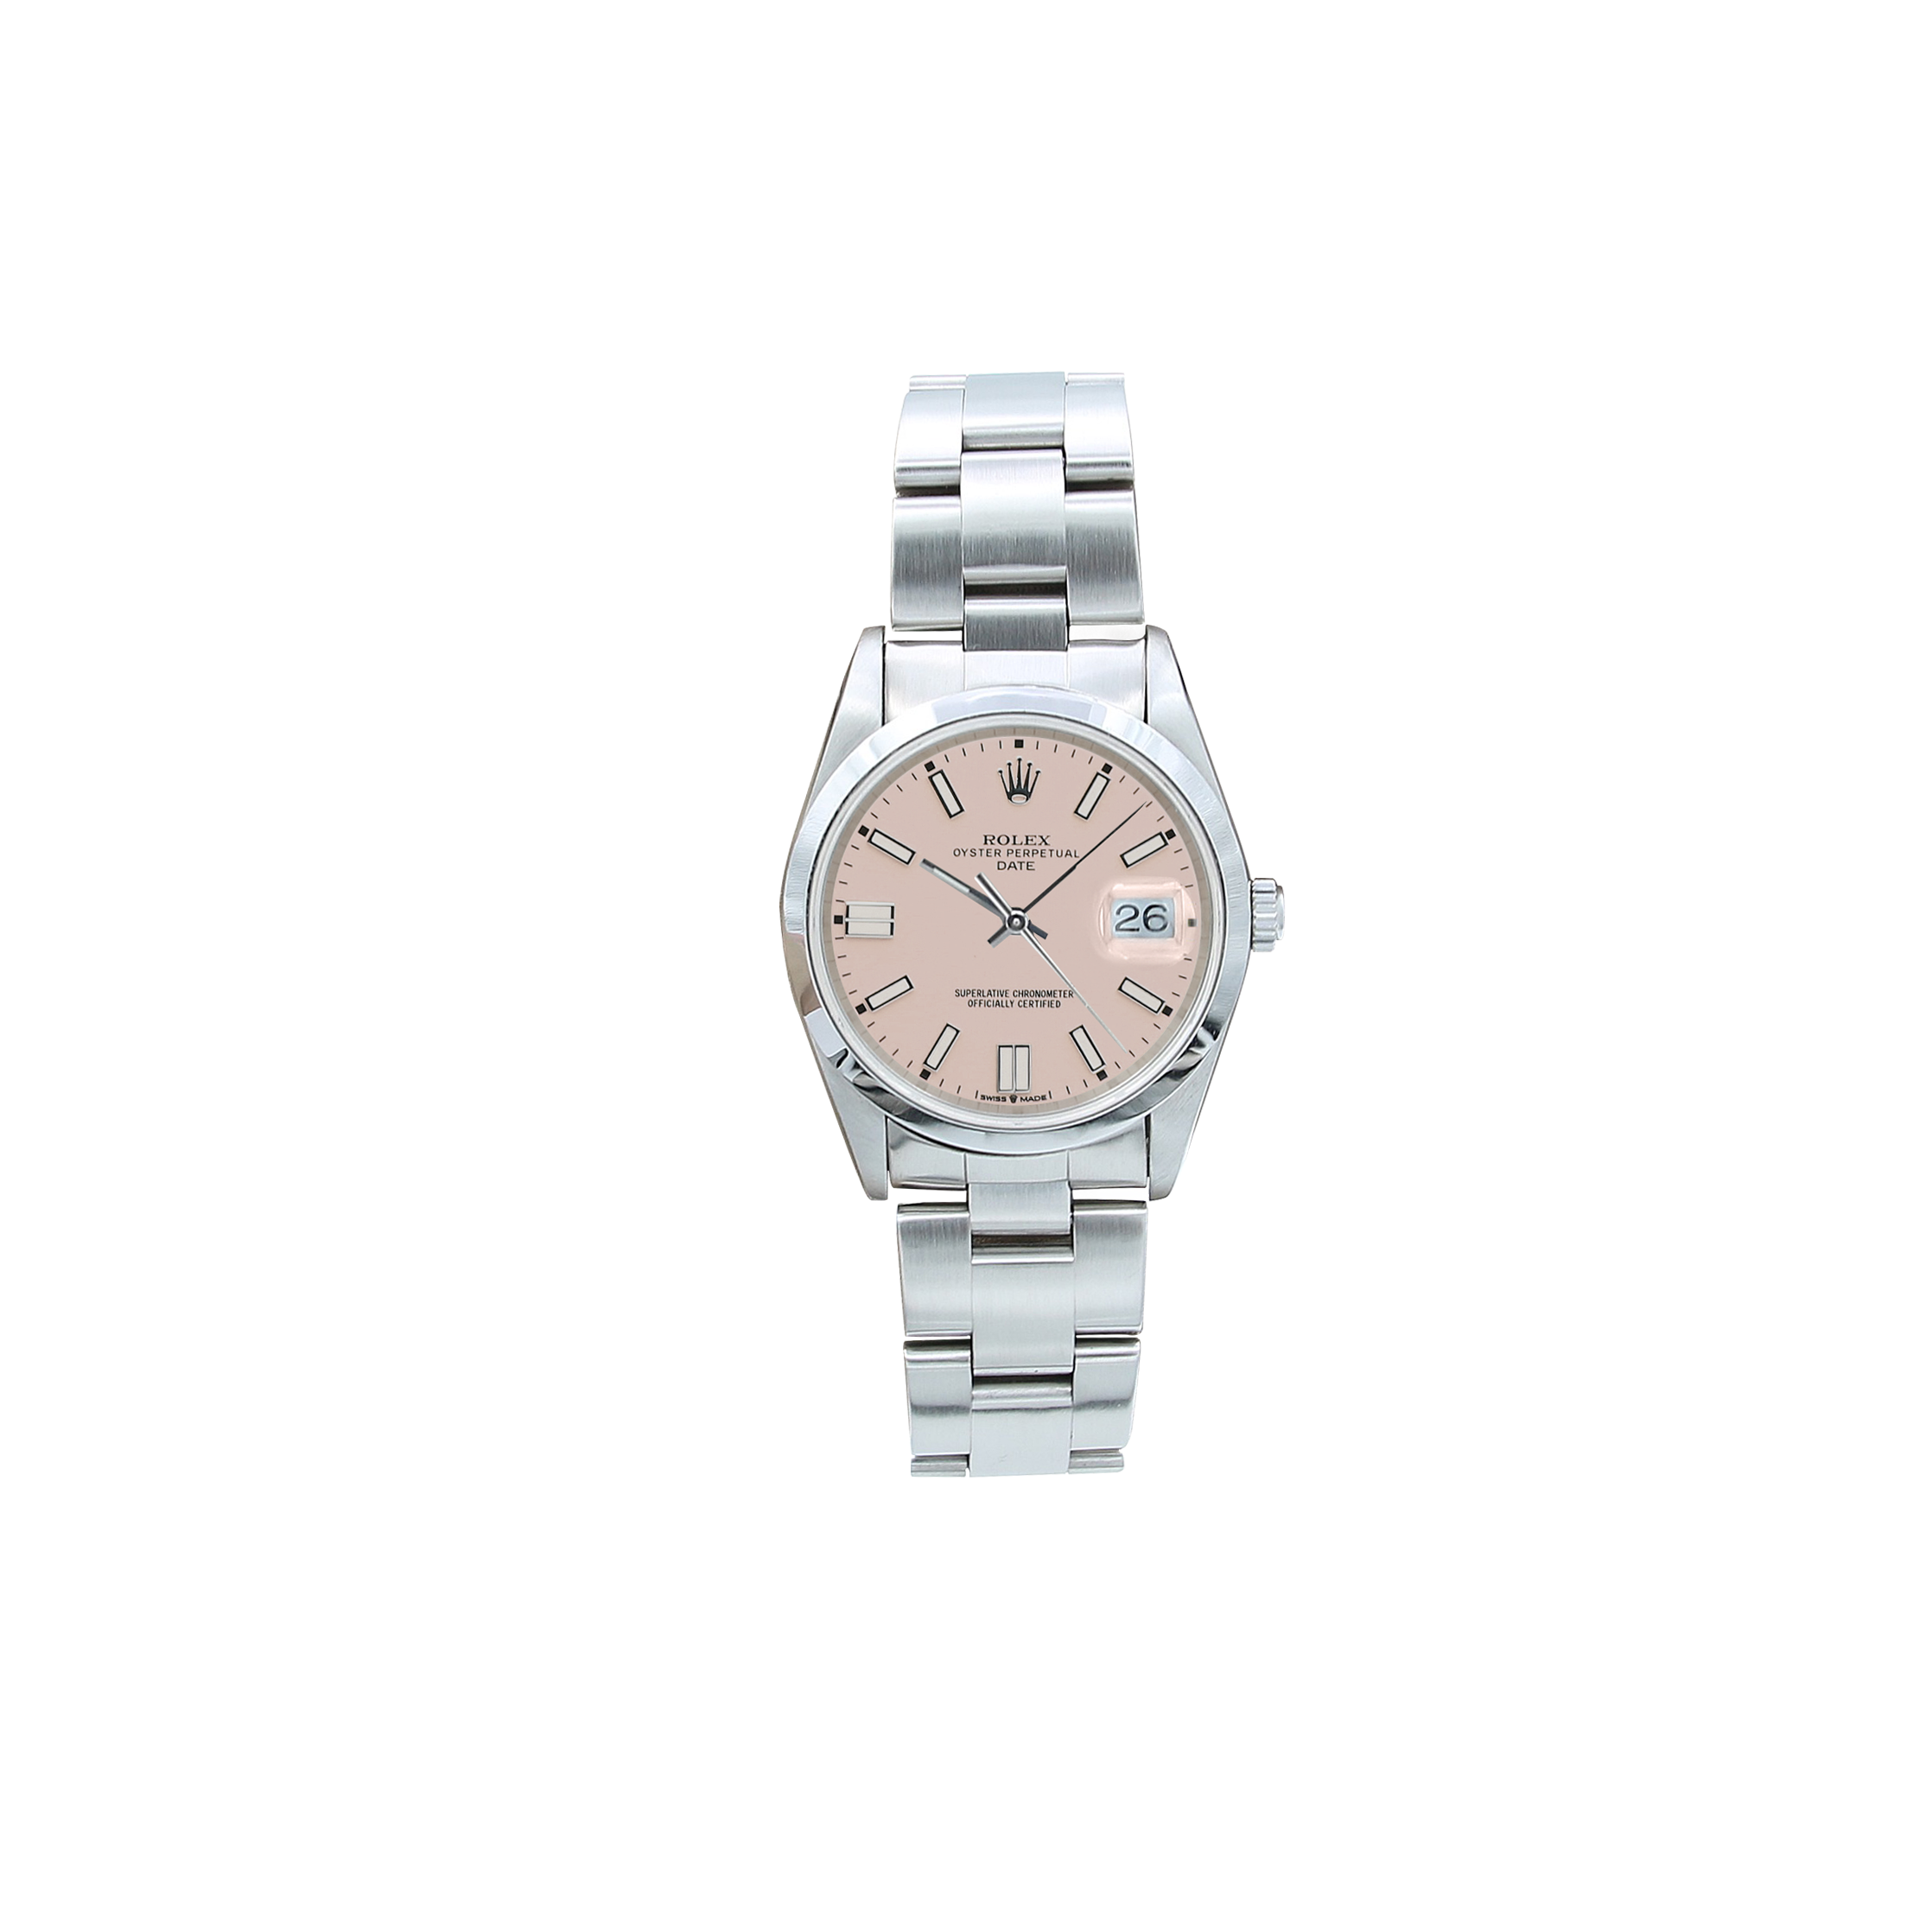 Rolex Date ref. 15200 - Oyster Bracelet - Cotton Candy Dial